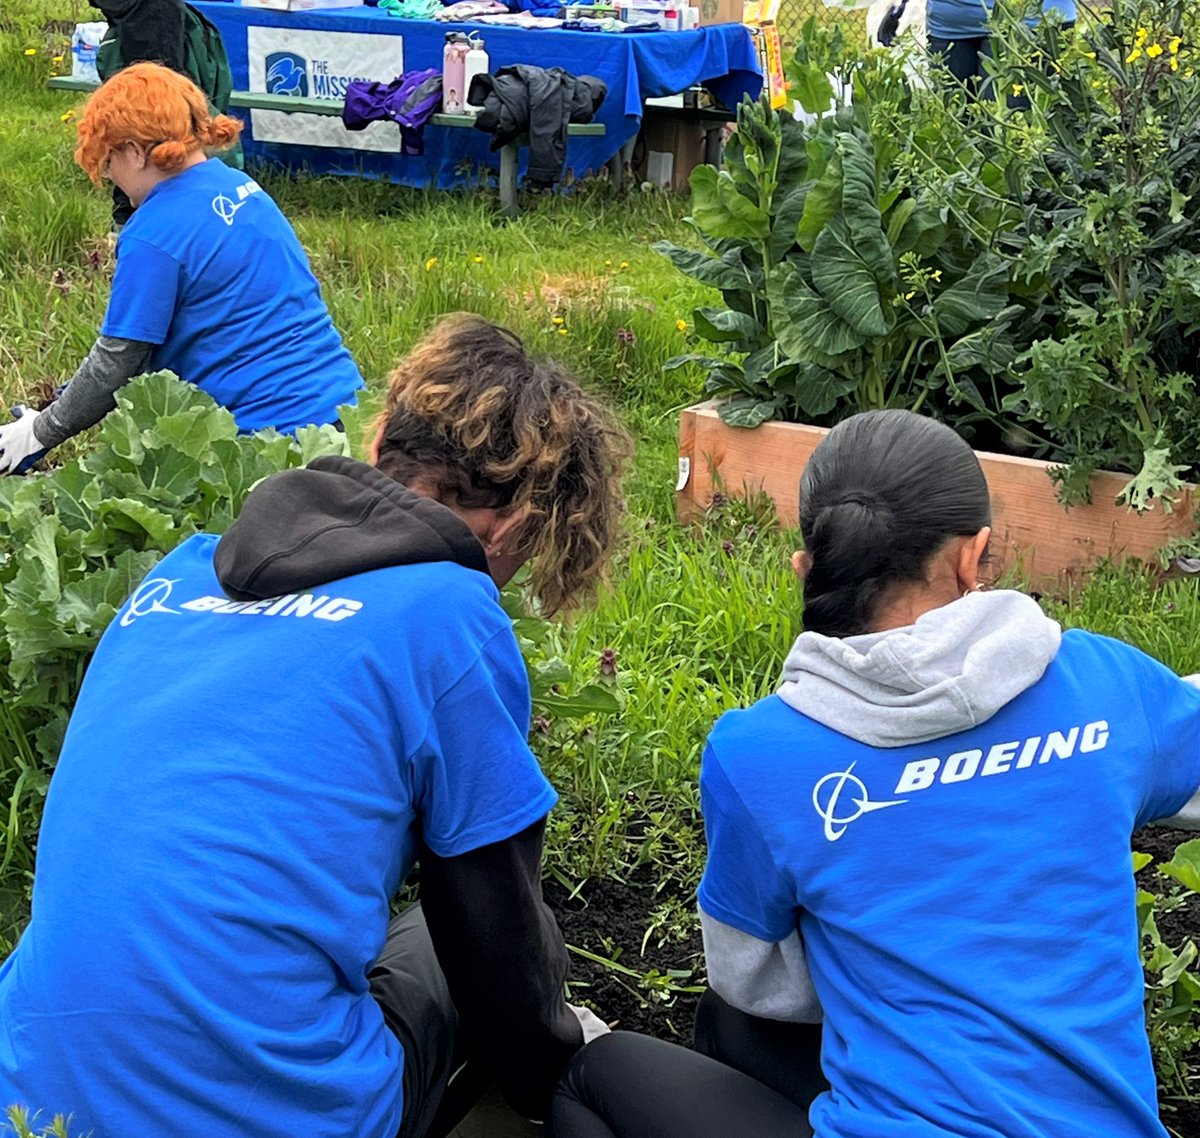 For #TeamBoeing in WA kindness soars on #GivingTuesday and always. So far in 2023, WA's #TeamBoeing has... 💙 granted $4.9M+ to WA nonprofits through the Boeing Employees Community Fund 💙 logged 154,000+ volunteer hours 💙 donated roughly $20M to orgs w/the Boeing gift match